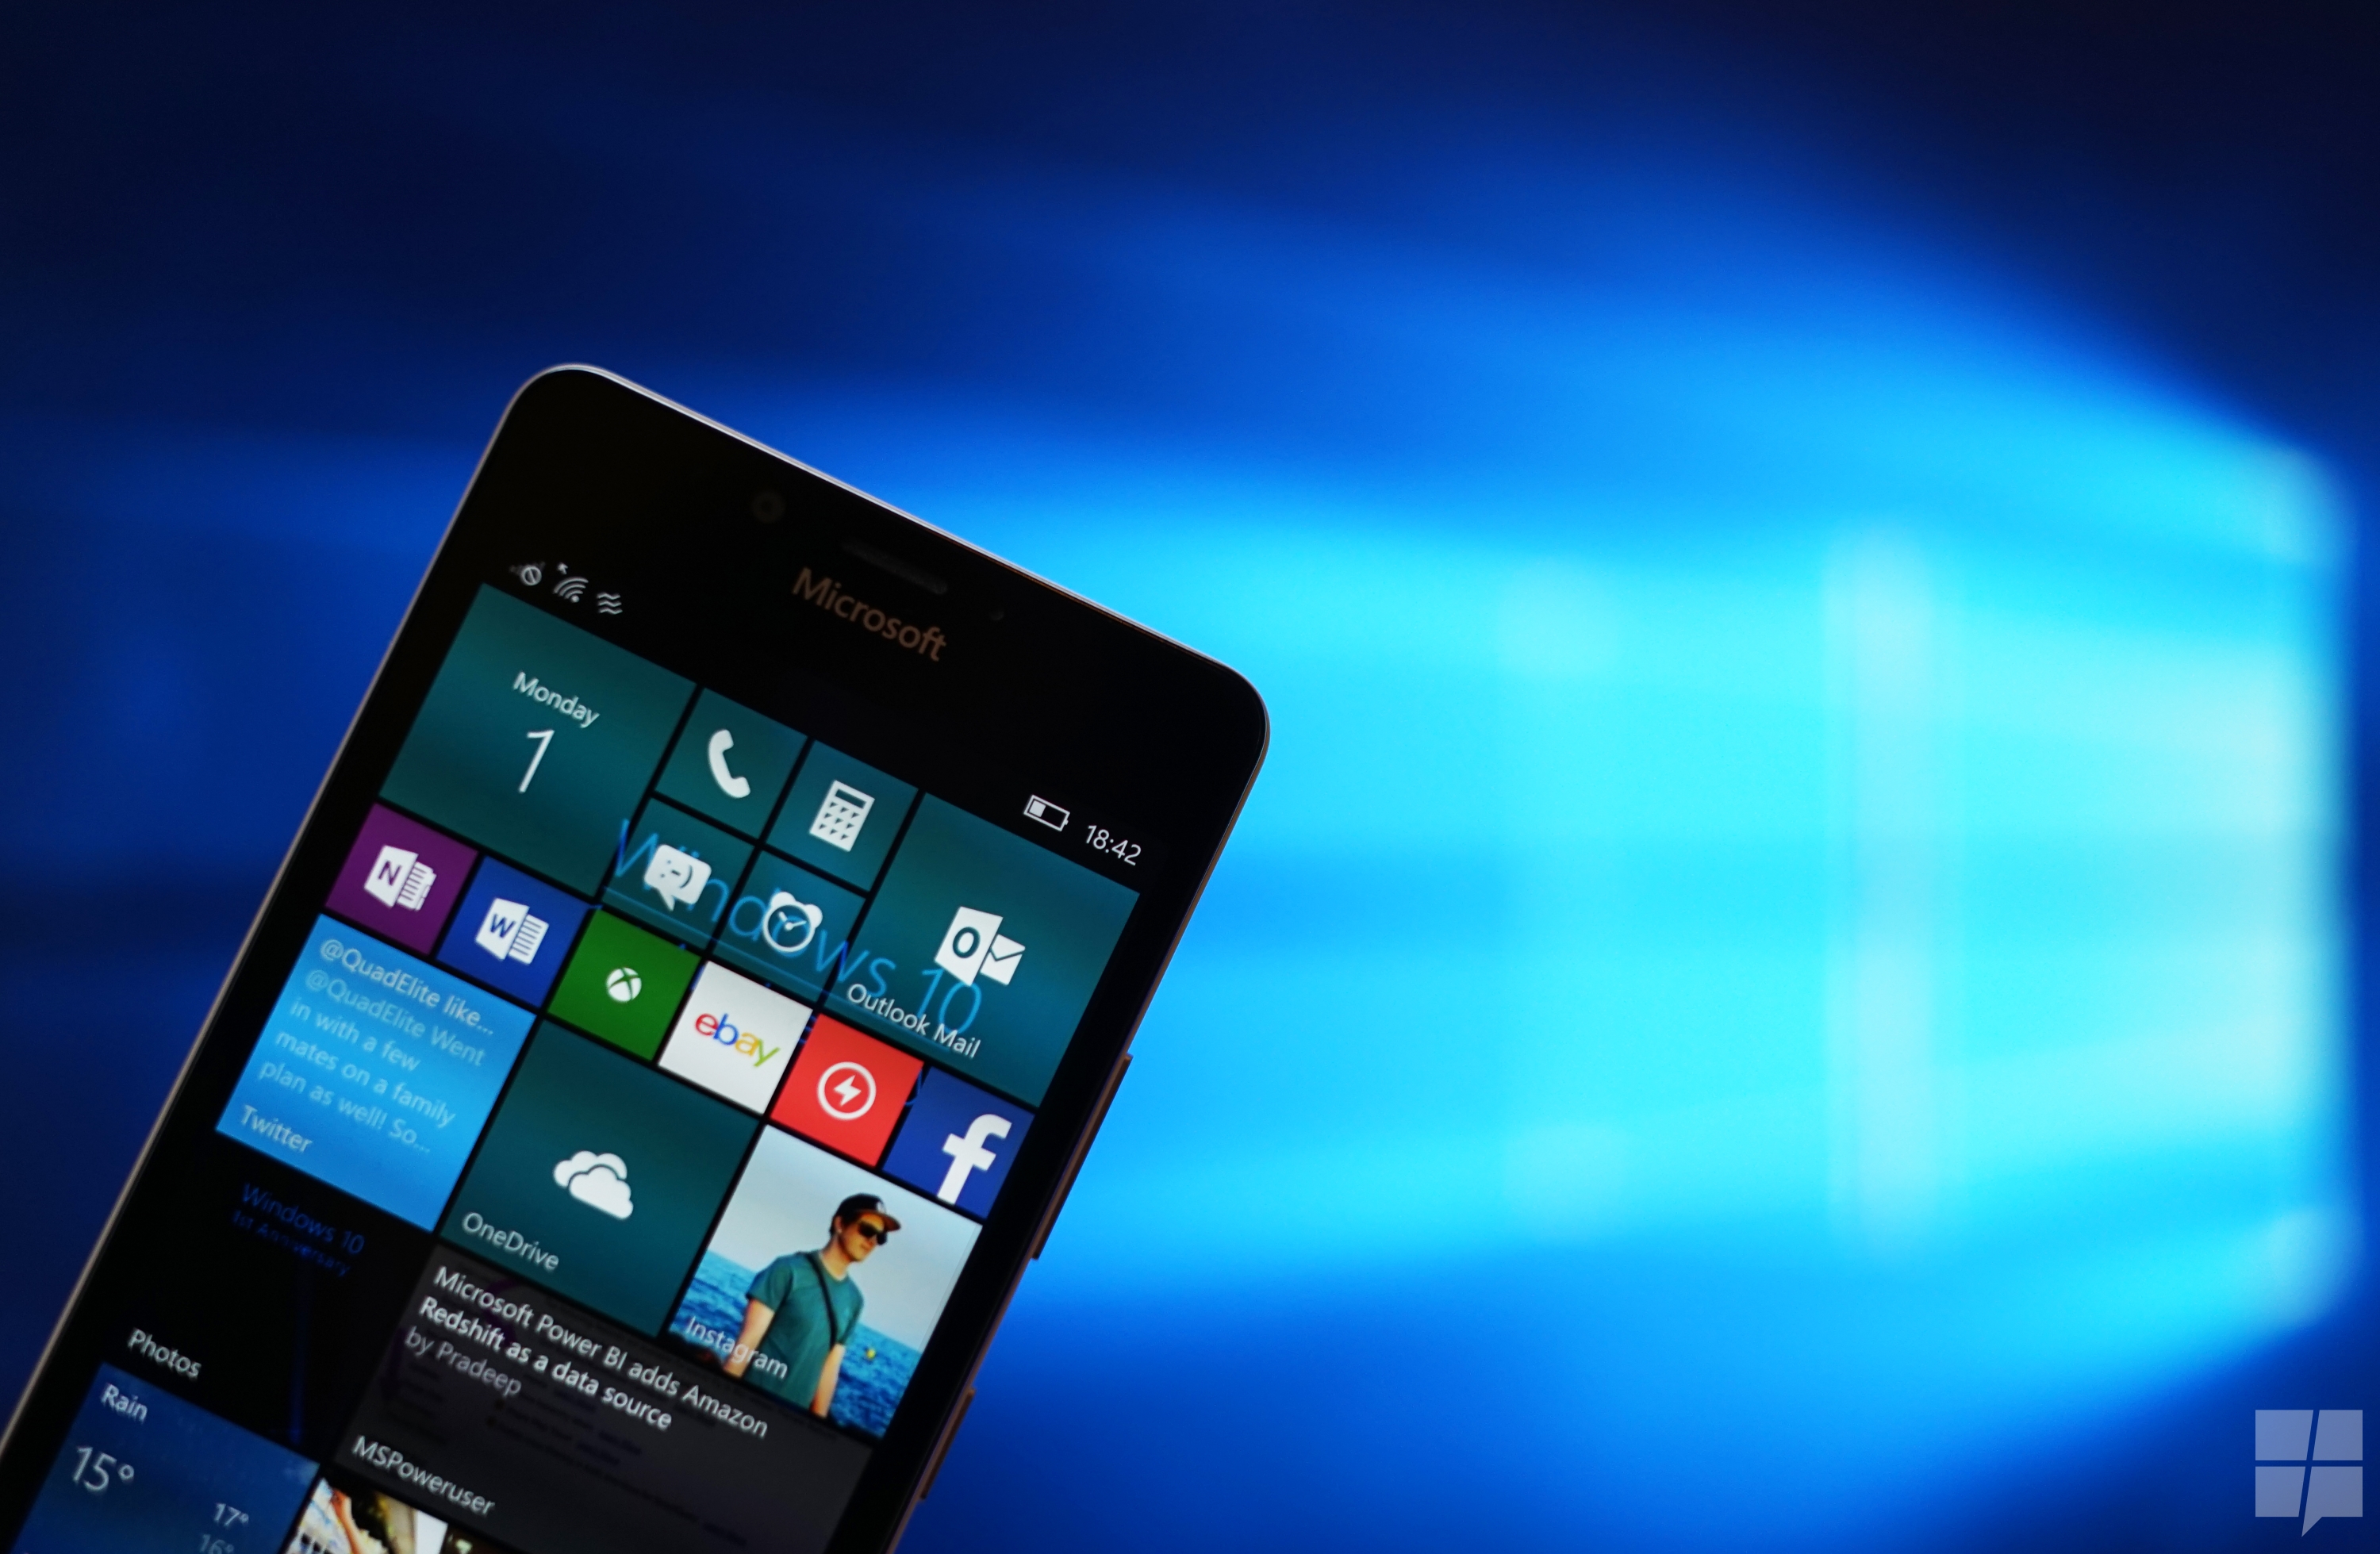 Review: Windows 10 Mobile Anniversary Update — Needed improvements